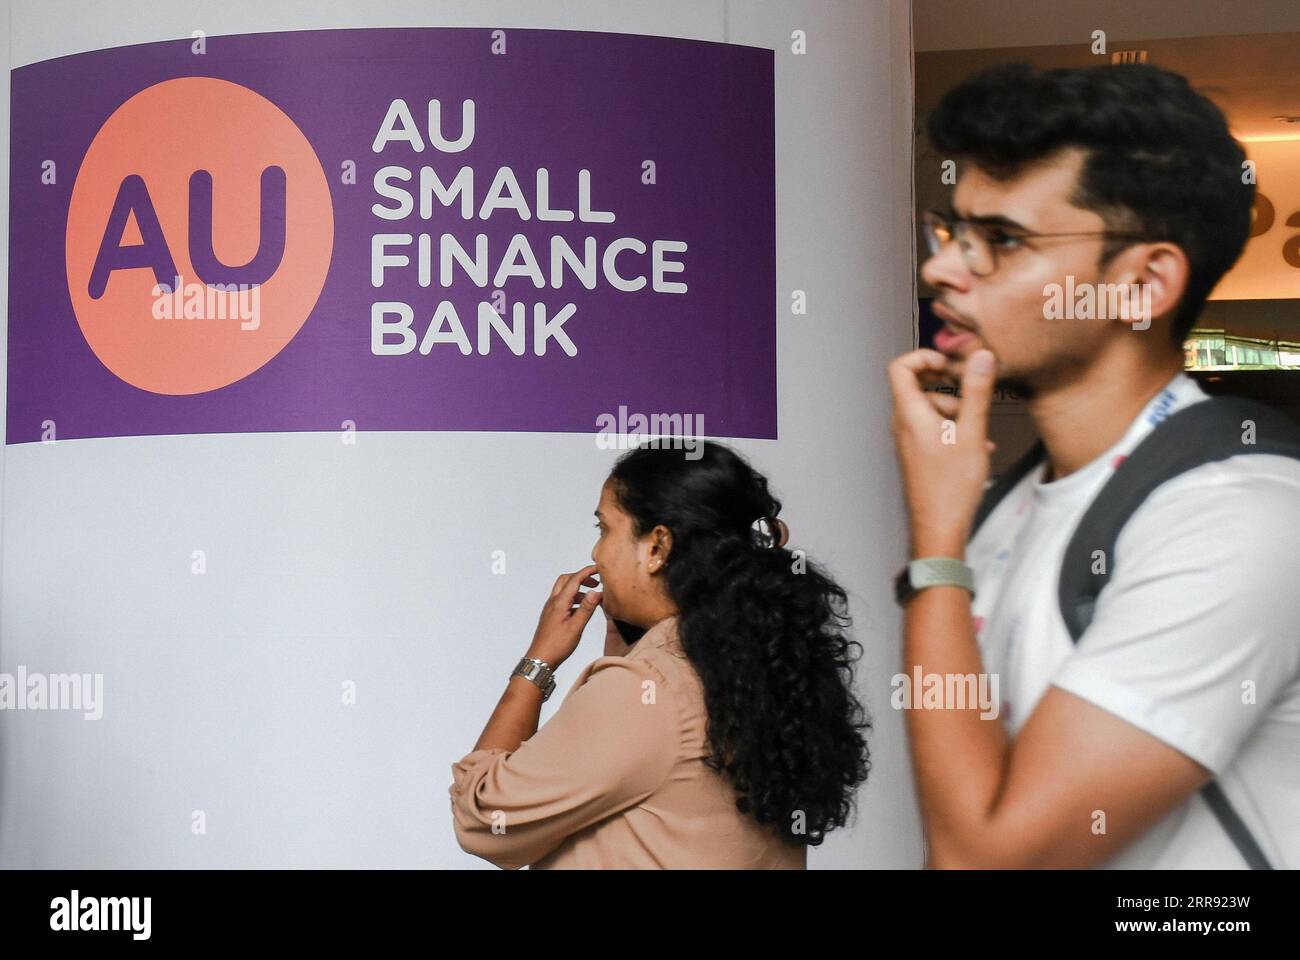 AU Small Finance Bank Advertising & TVC on Behance